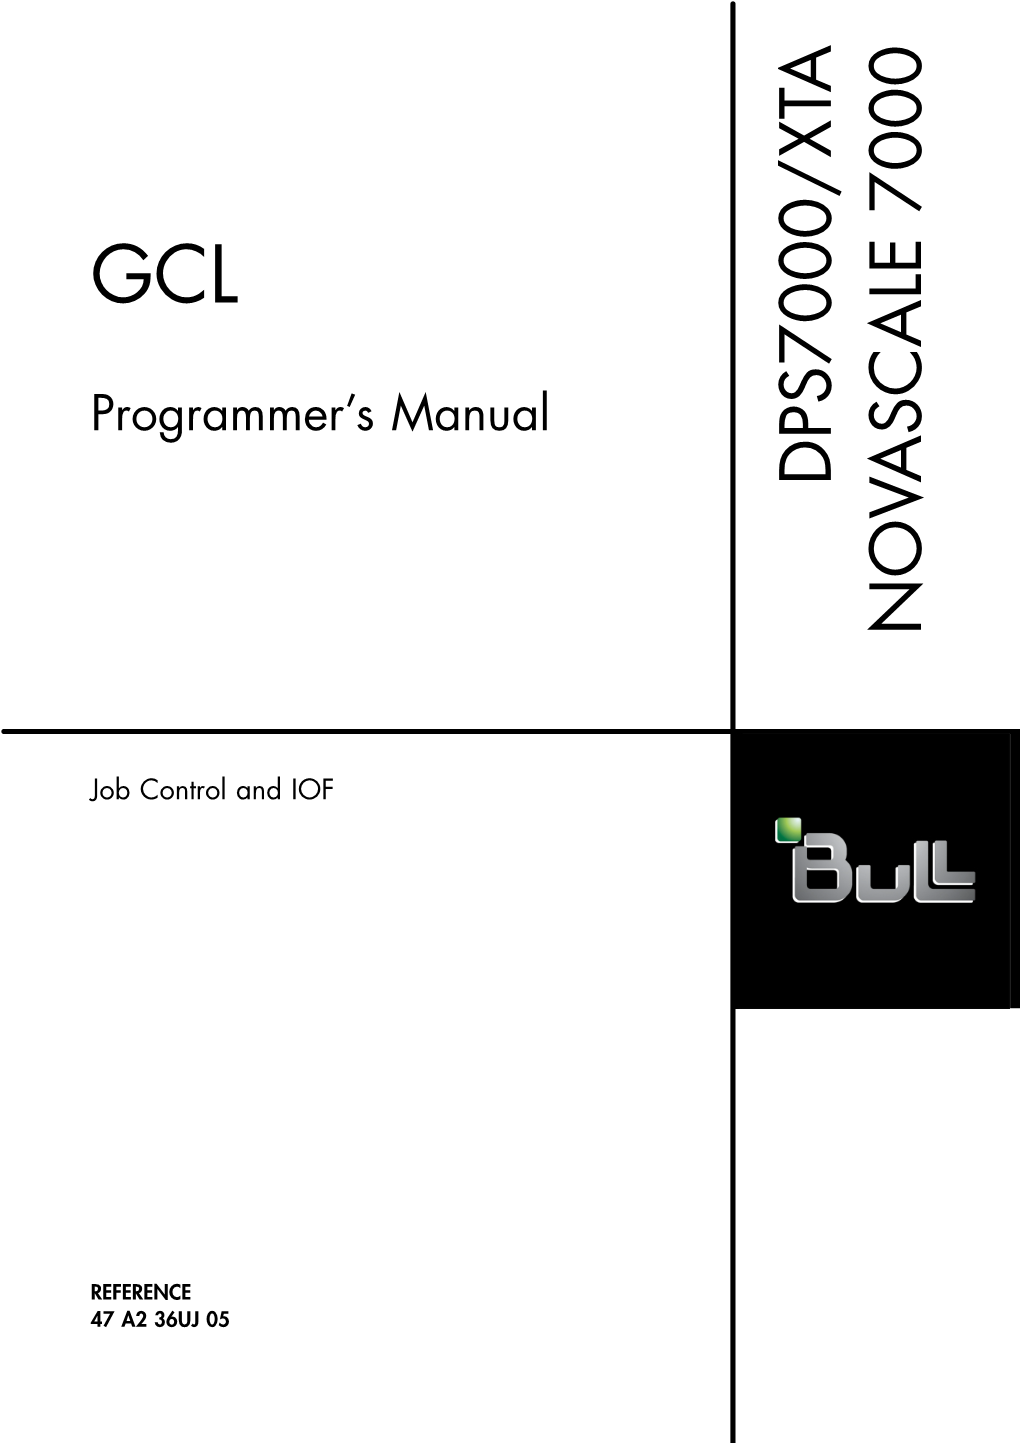 GCL Programmer's Manual